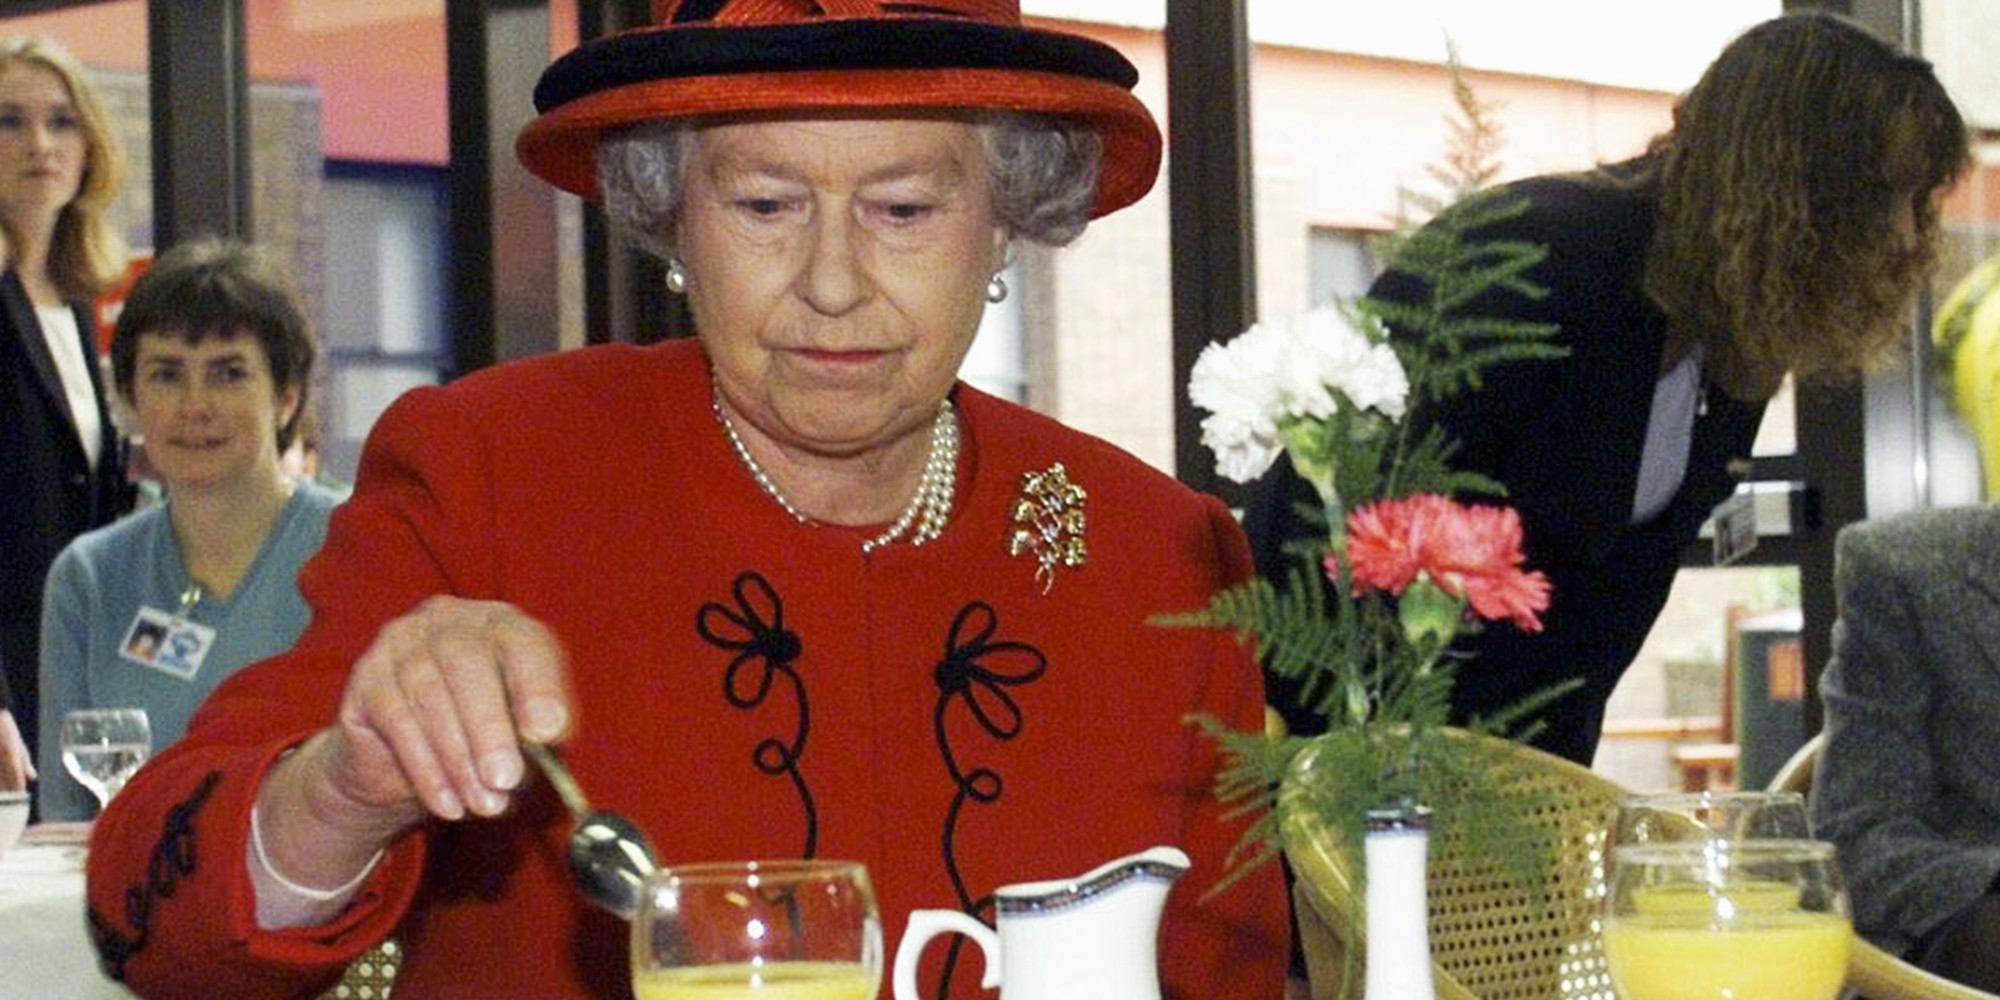 7 Crazy Reasons You Should Be Intimidated To Eat With Queen Elizabeth